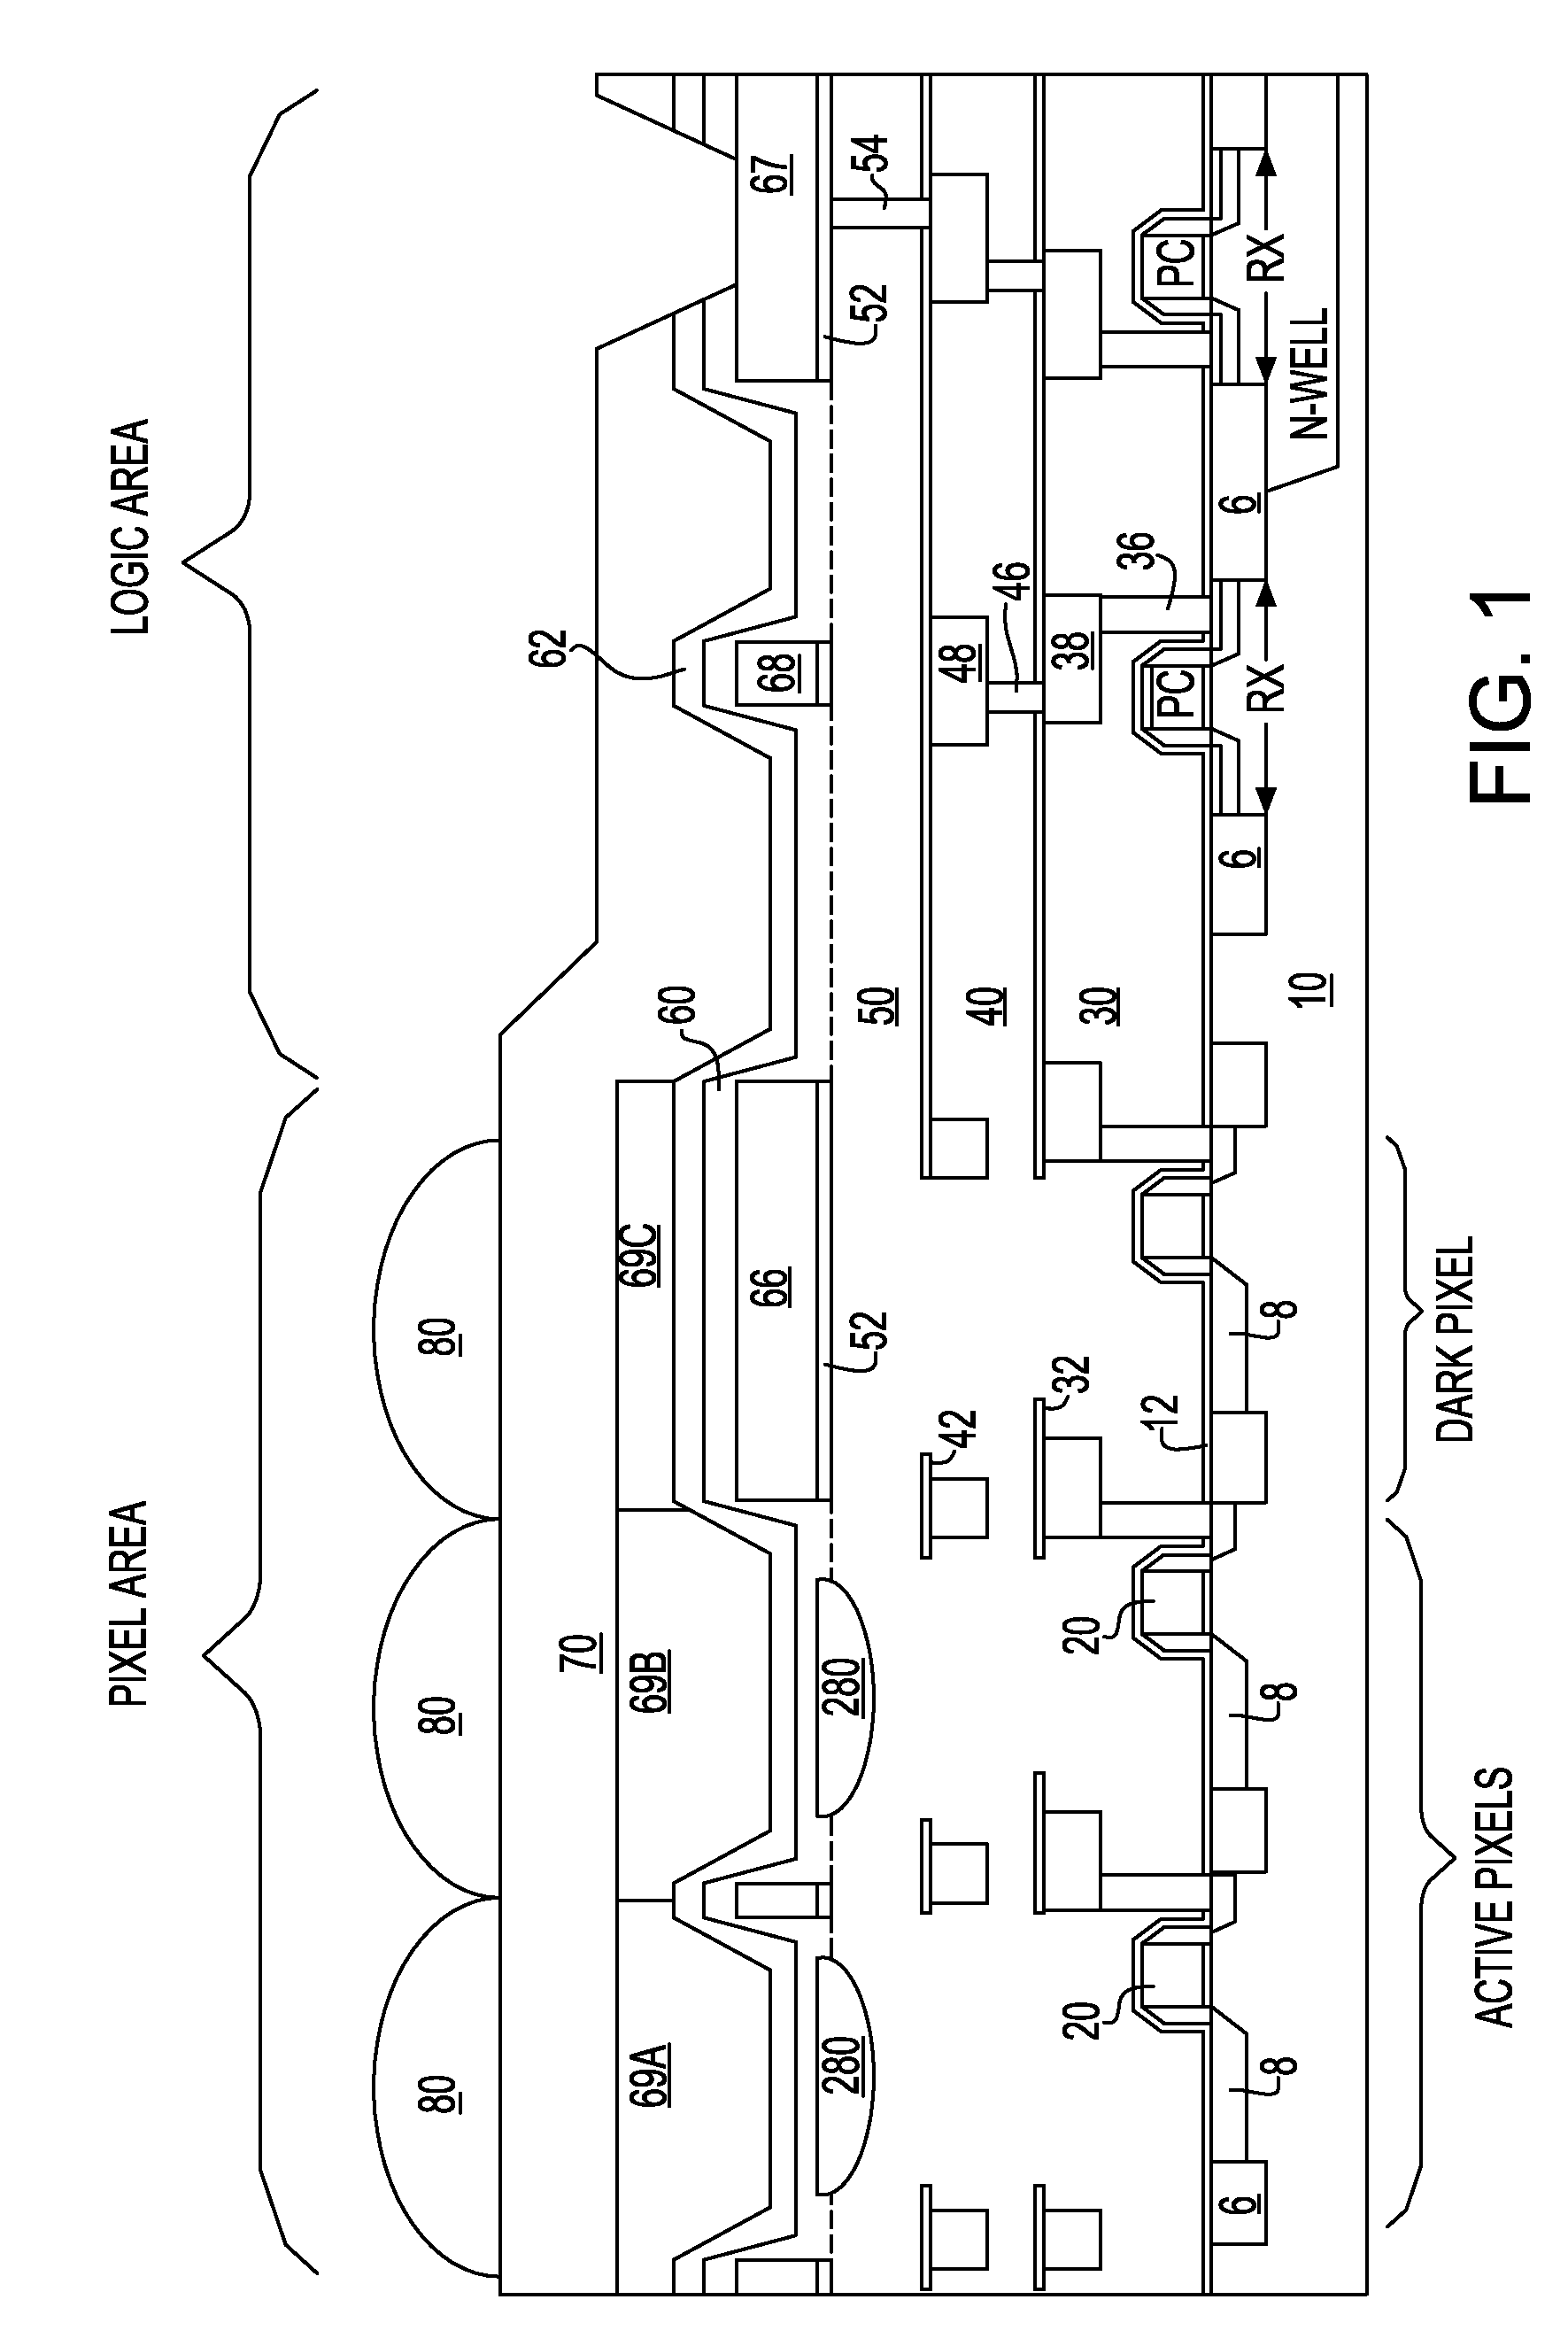 Method of forming an inverted lens in a semiconductor structure